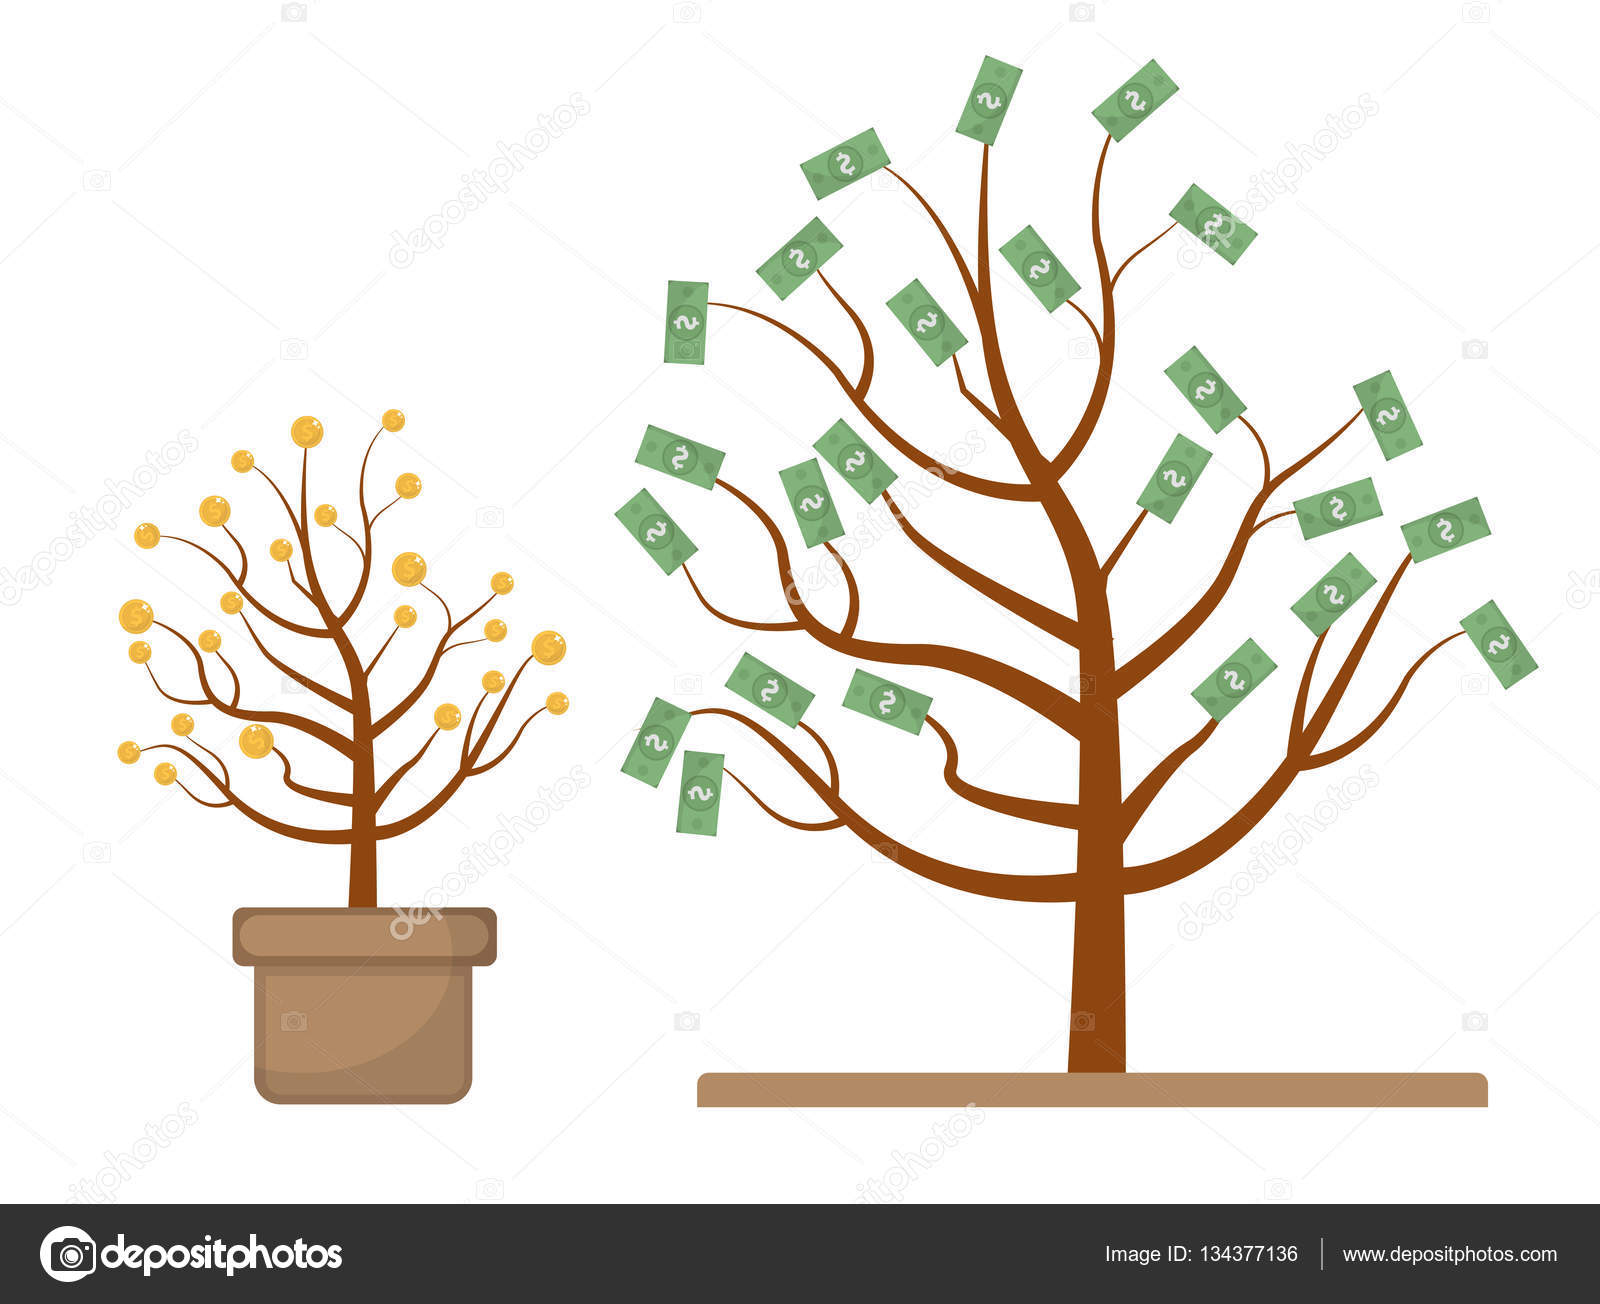 Tree with money. Coins and dollars. Evolution, growth, progressive.